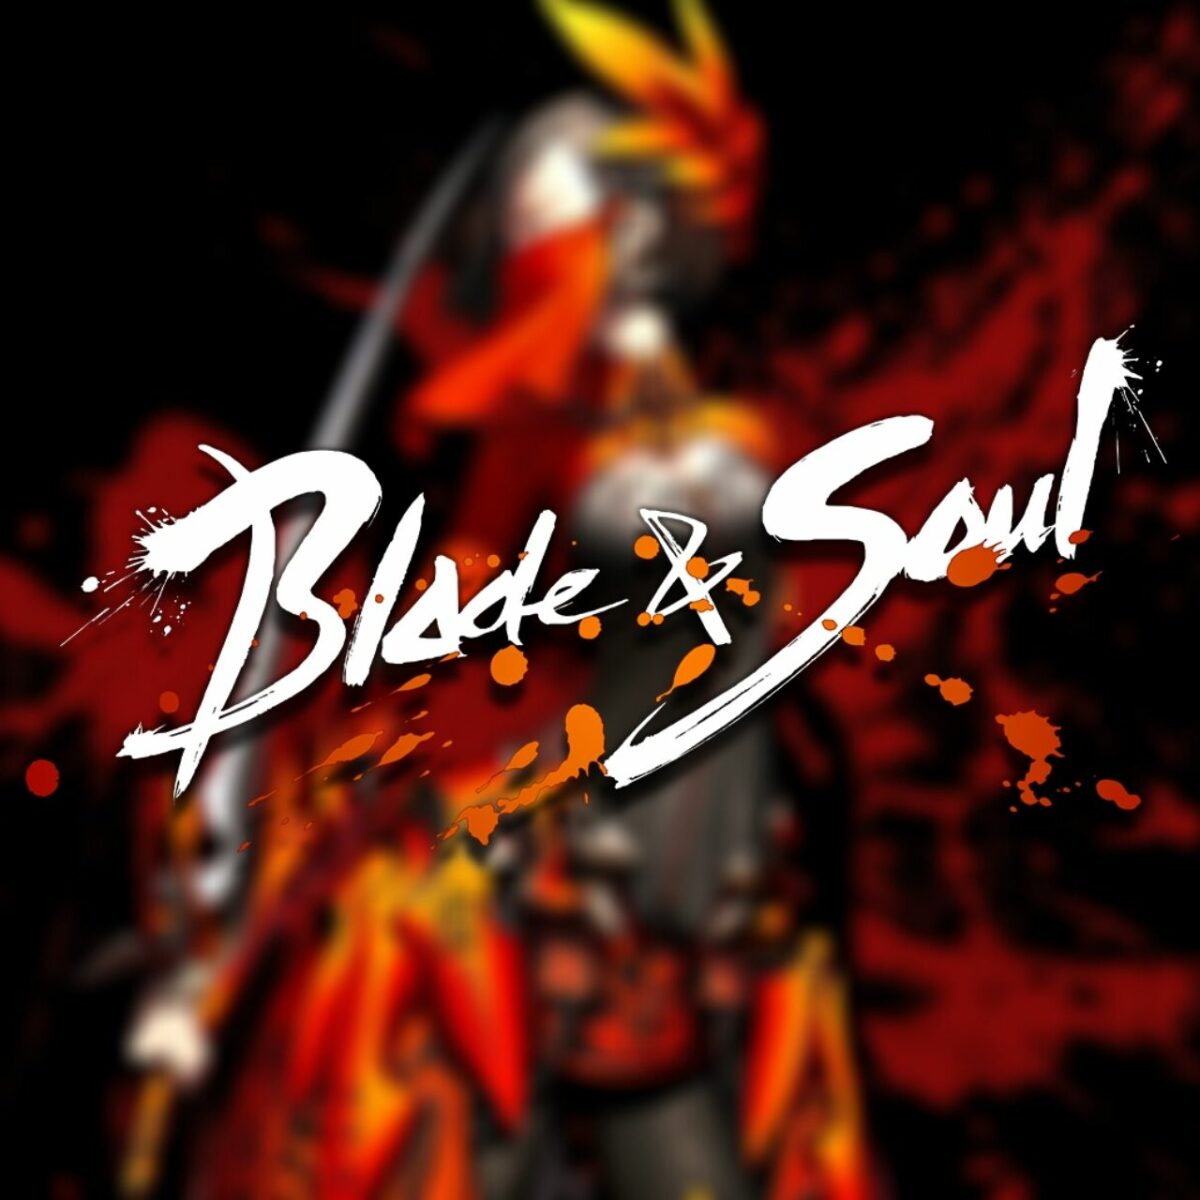 blade and soul fps fix